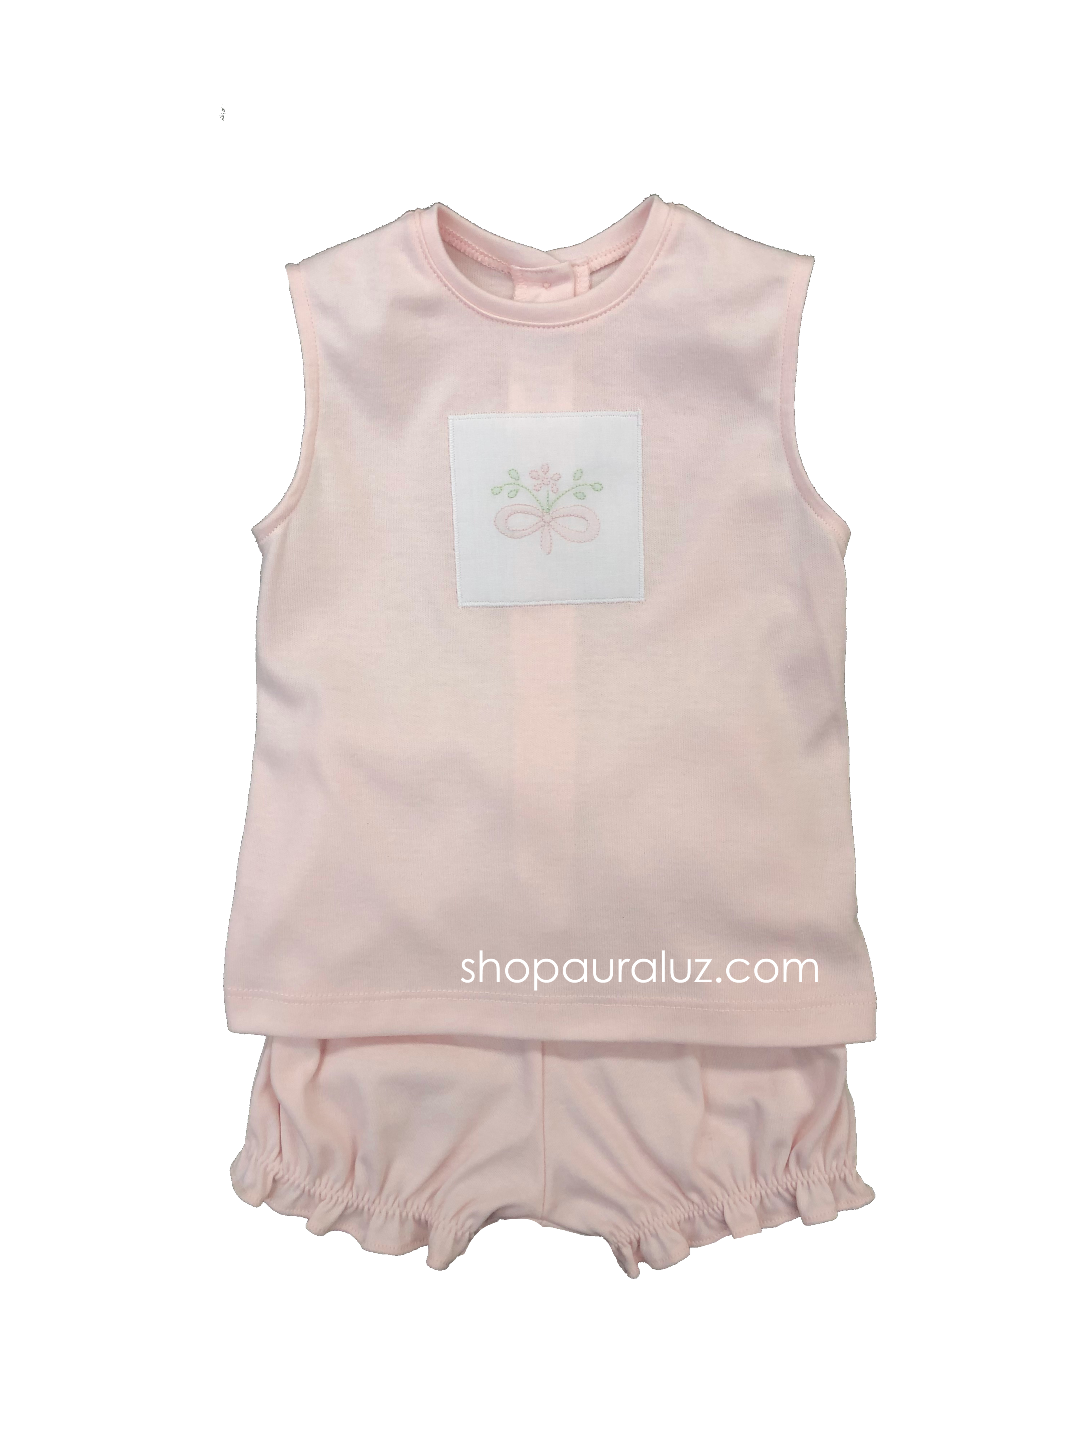 Auraluz Girl 2pc Sleeveless Knit Set..Pink with embroidered bow. STORE EXCLUSIVE!